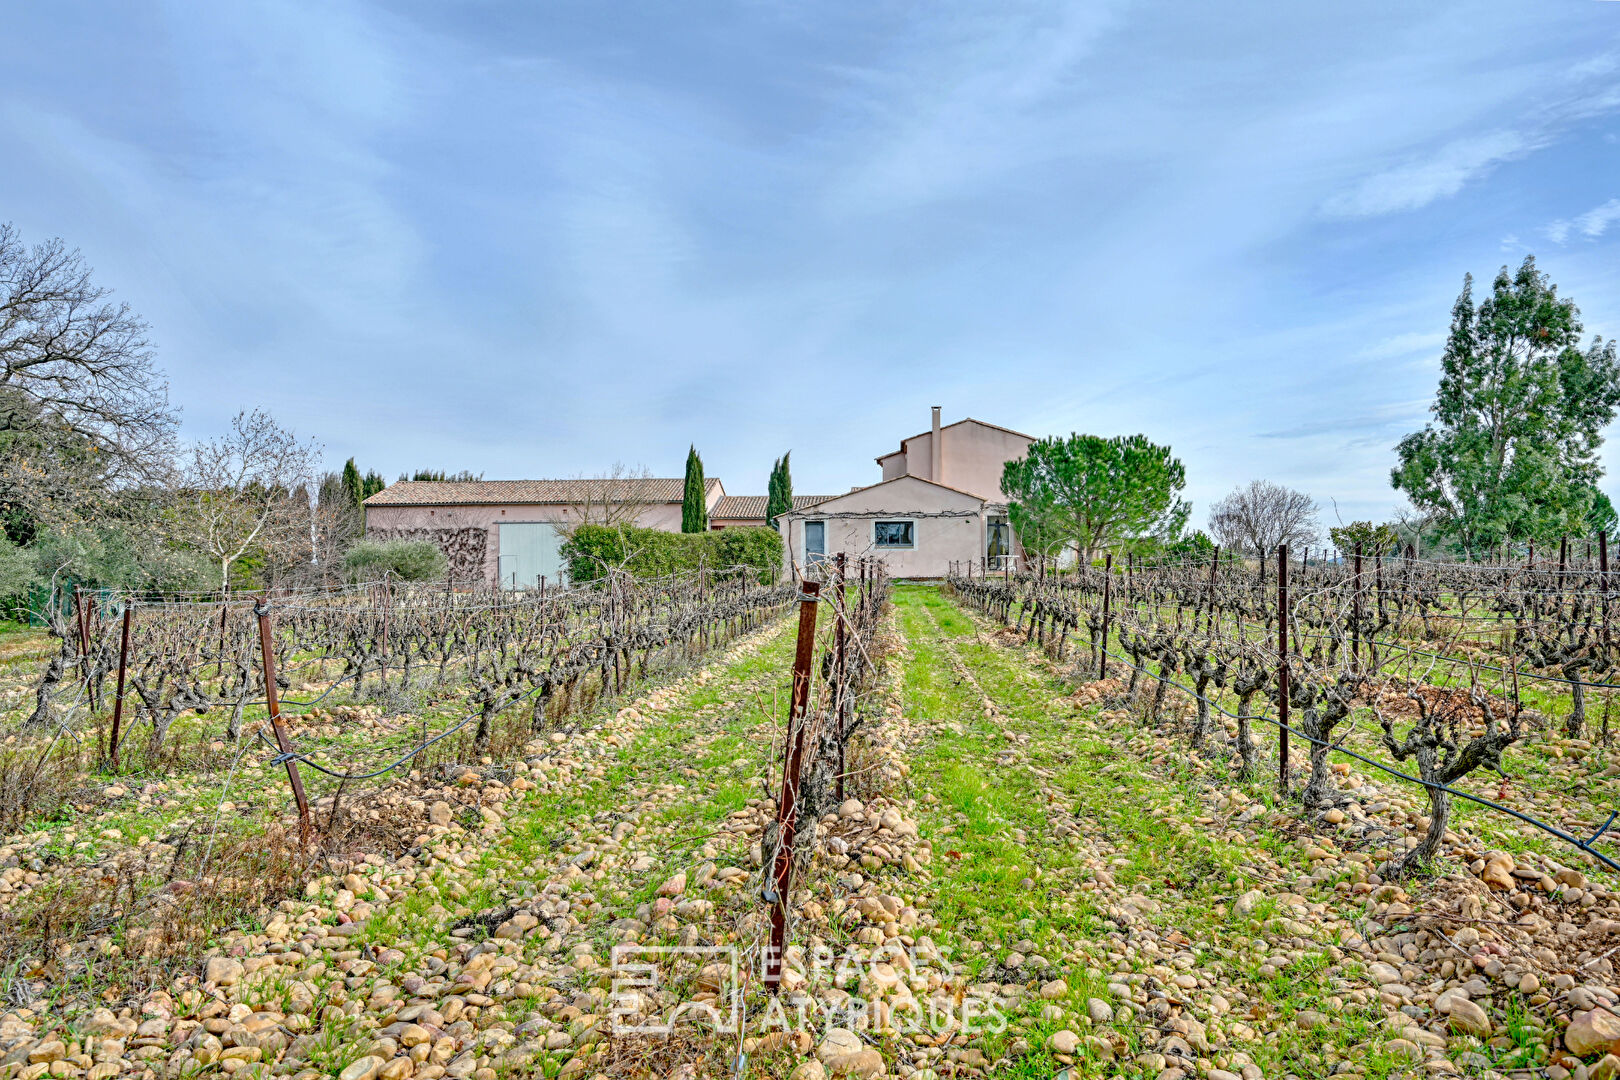 Family home surrounded by vineyards